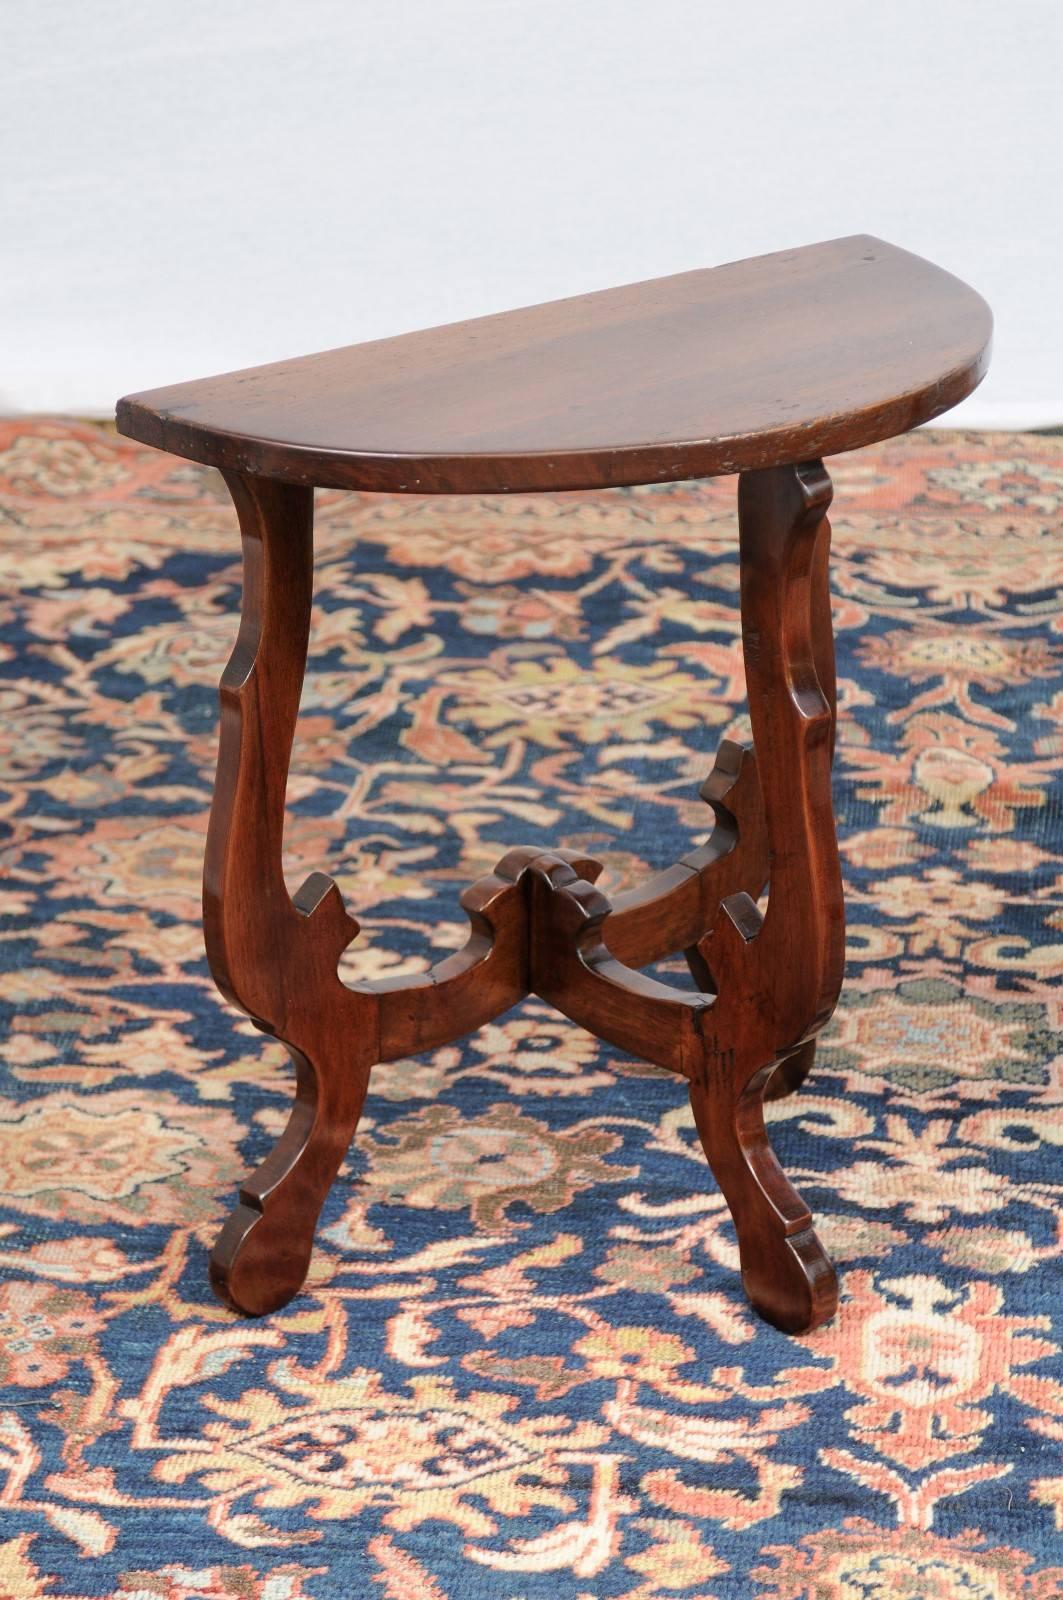 Carved Pair of Petite Italian Baroque Style Demilune Tables with Lyre Legs, circa 1870